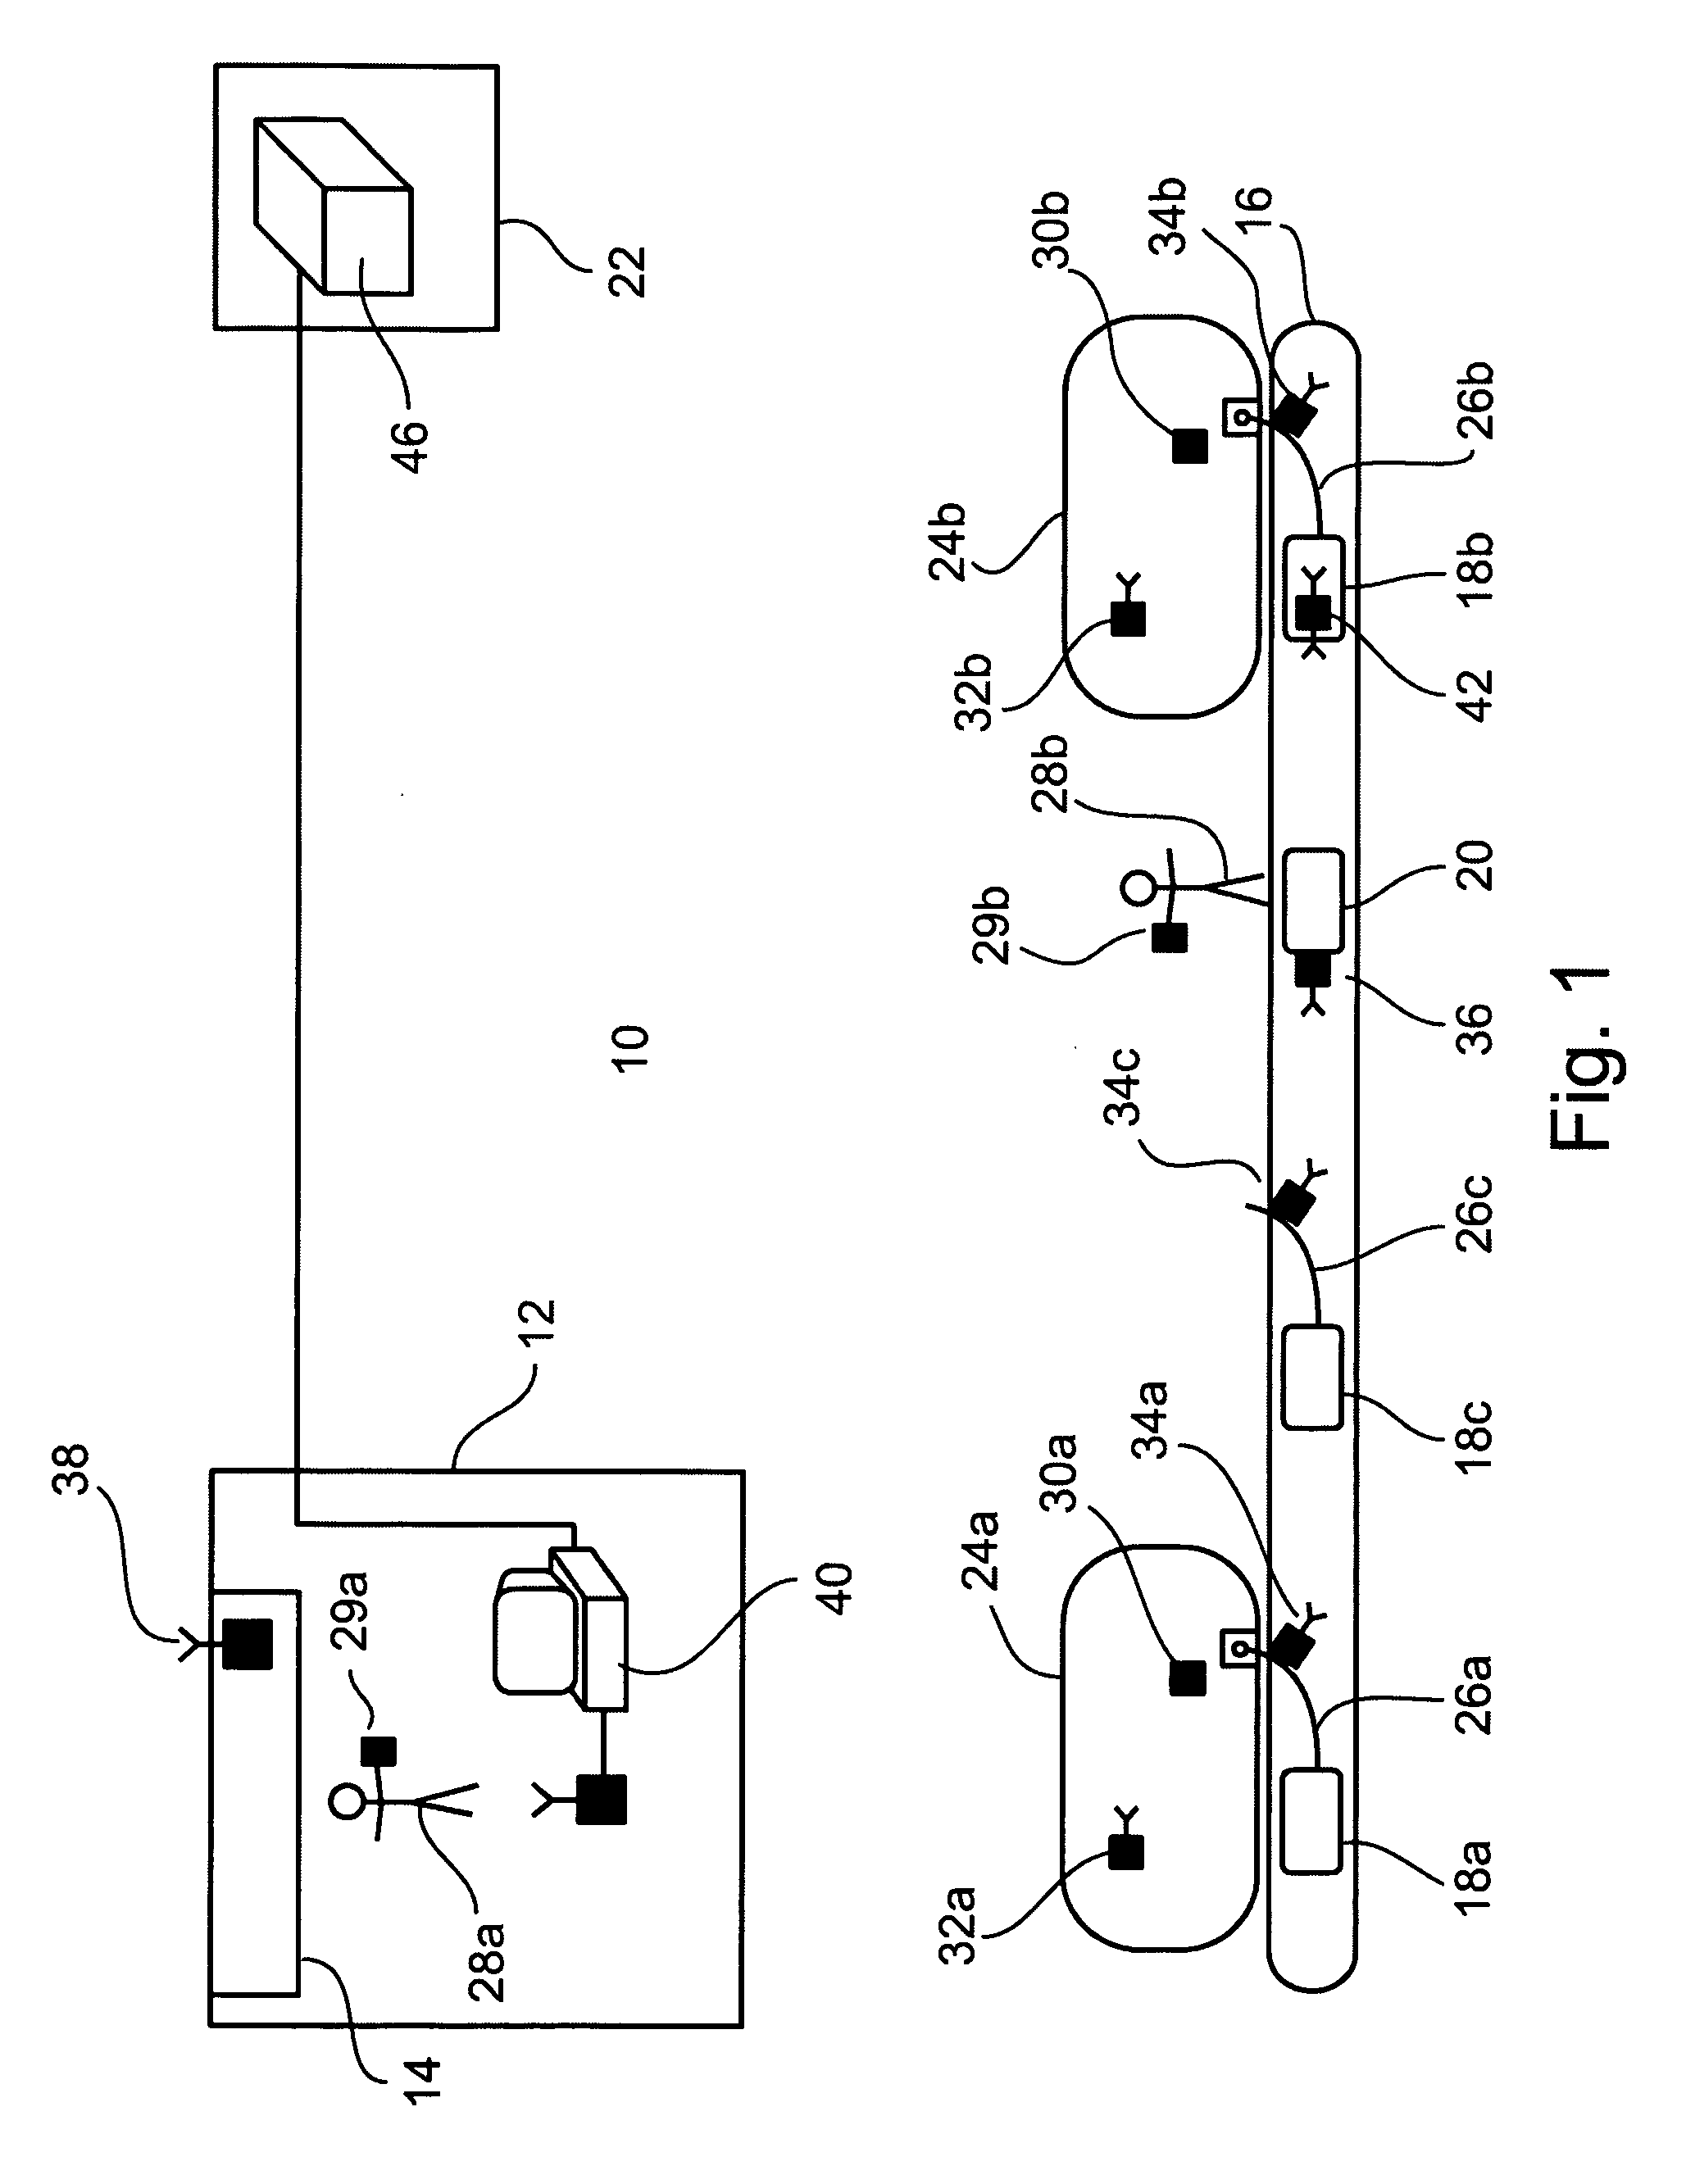 System and Method for Autorizing Purchases Associated with a Vehicle